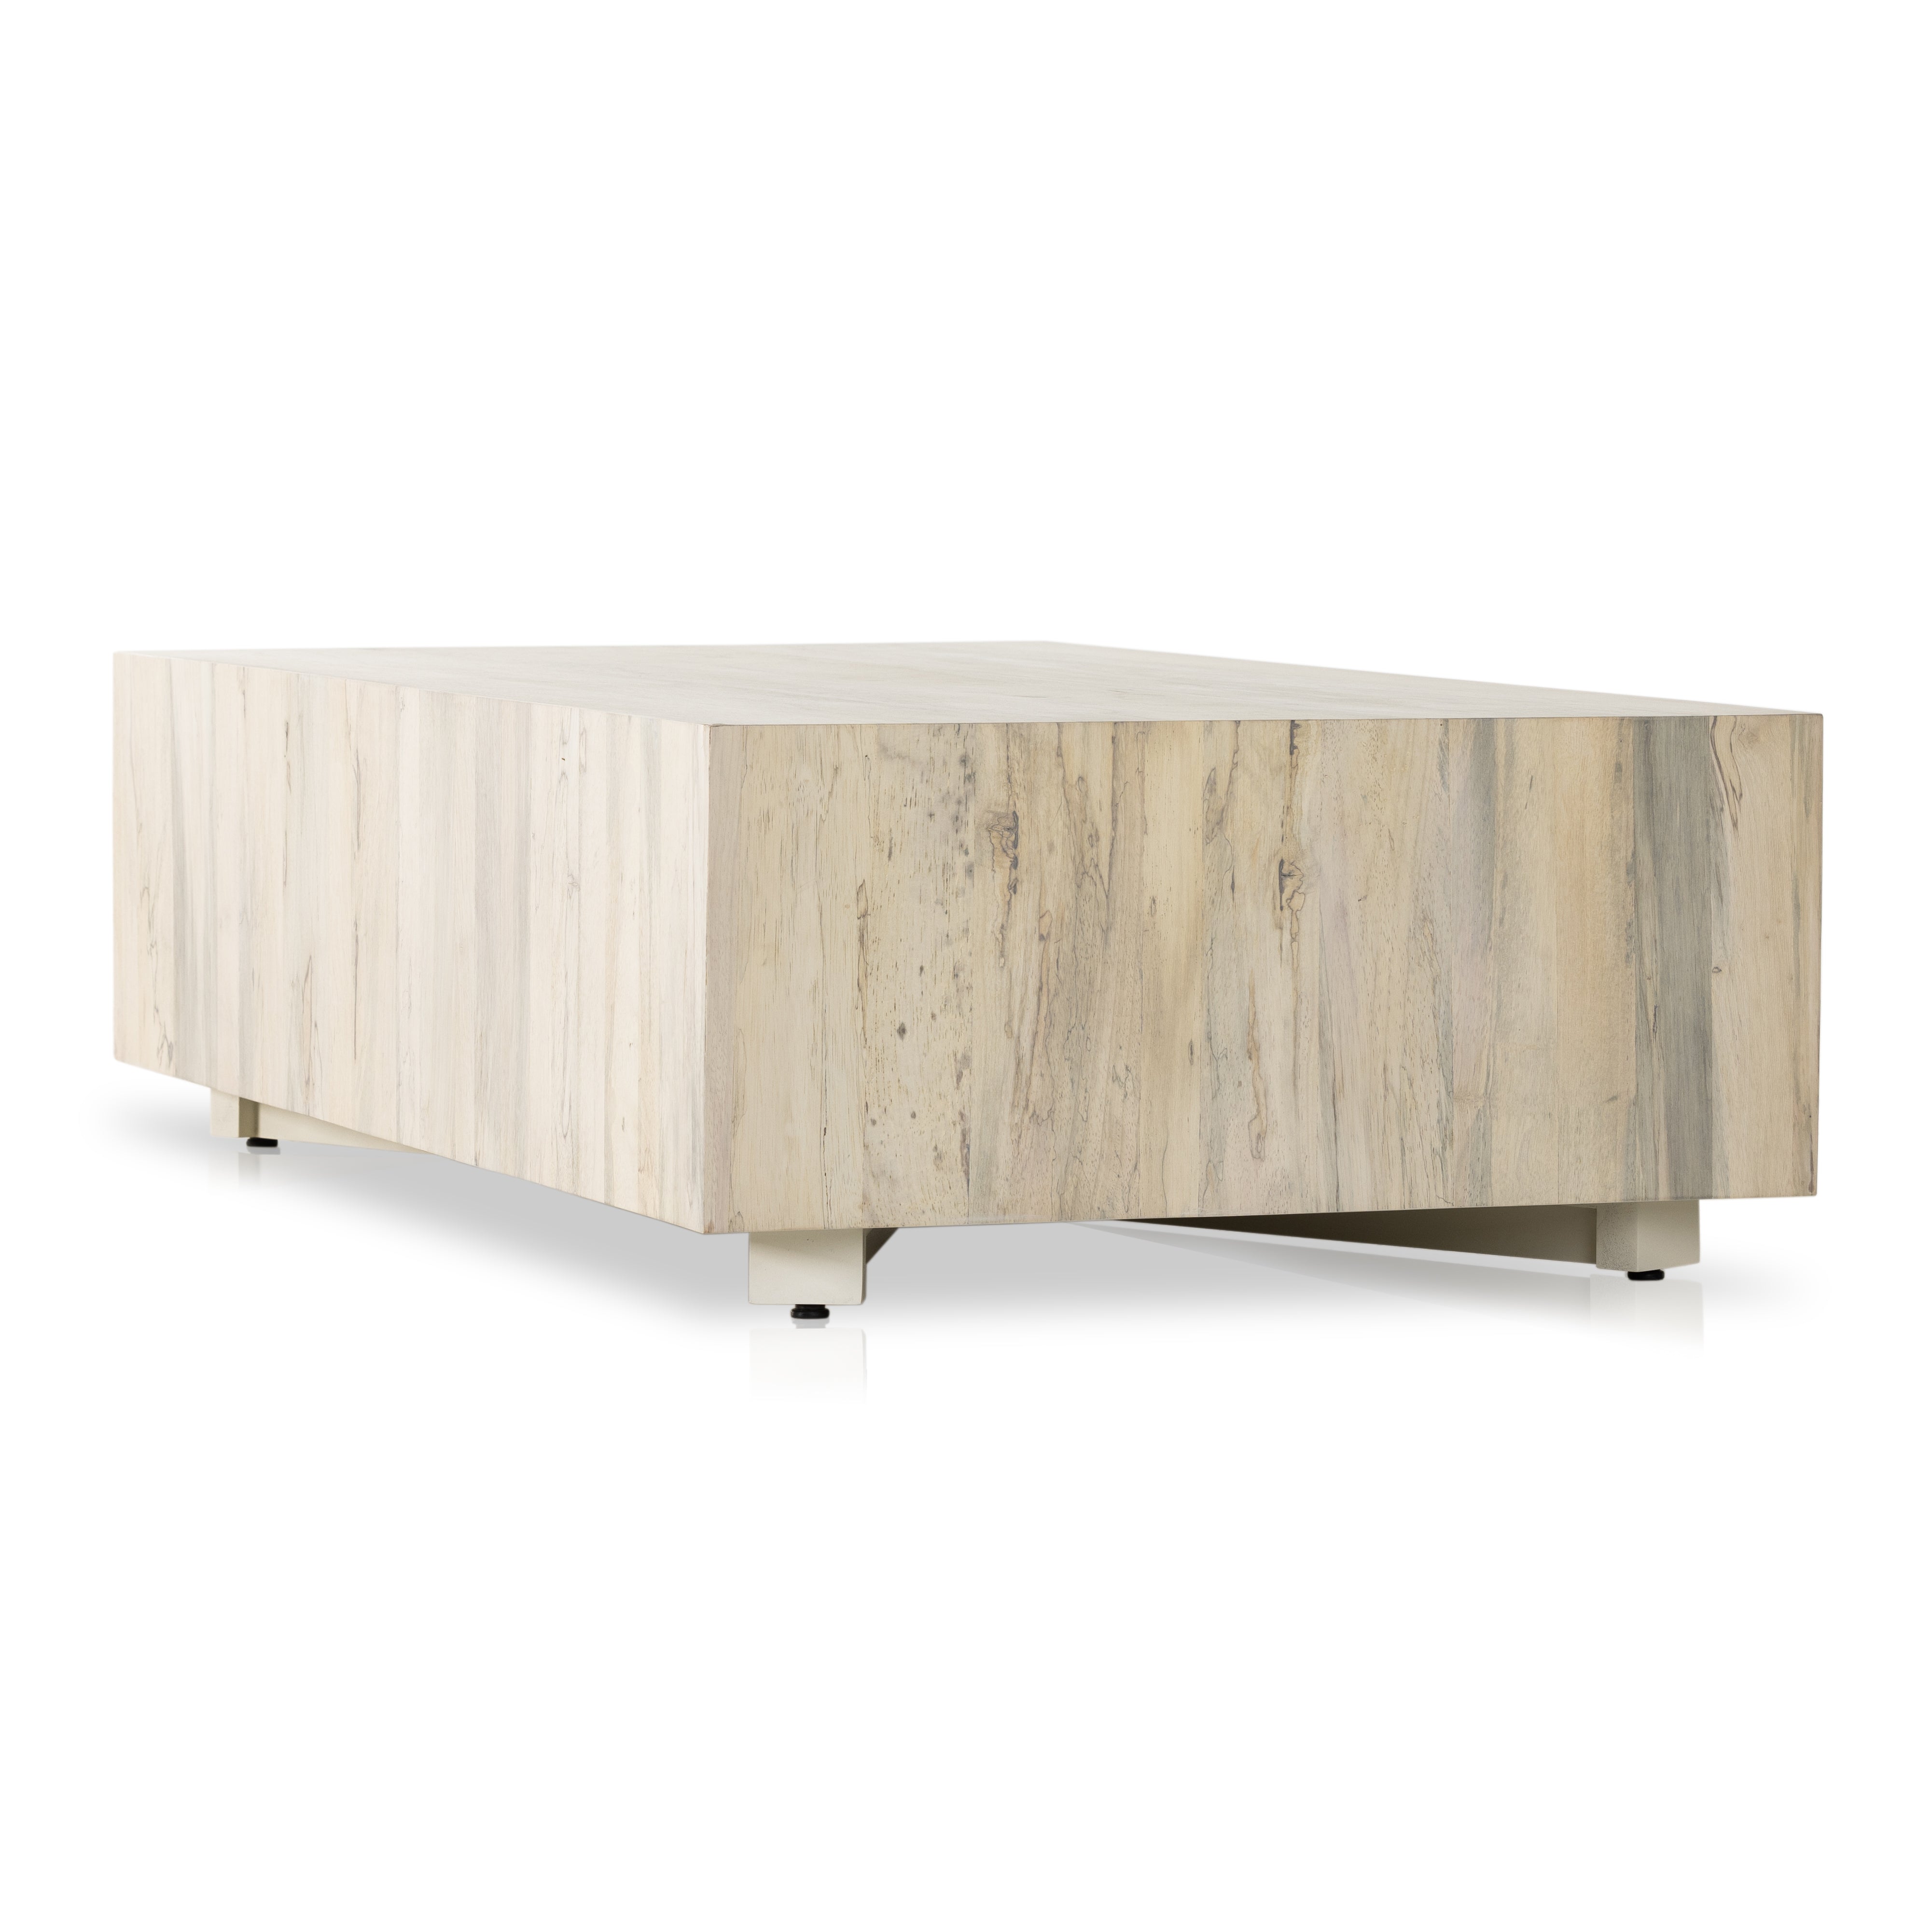 Stunning forces of nature, captured in a coffee table. Spalted primavera wood is hand-shaped into a rectangular silhouette and finished in a white hue. Reflective of woods' natural character, a slight color variance is possible from piece to piece. Amethyst Home provides interior design, new construction, custom furniture, and area rugs in the Charlotte metro area.